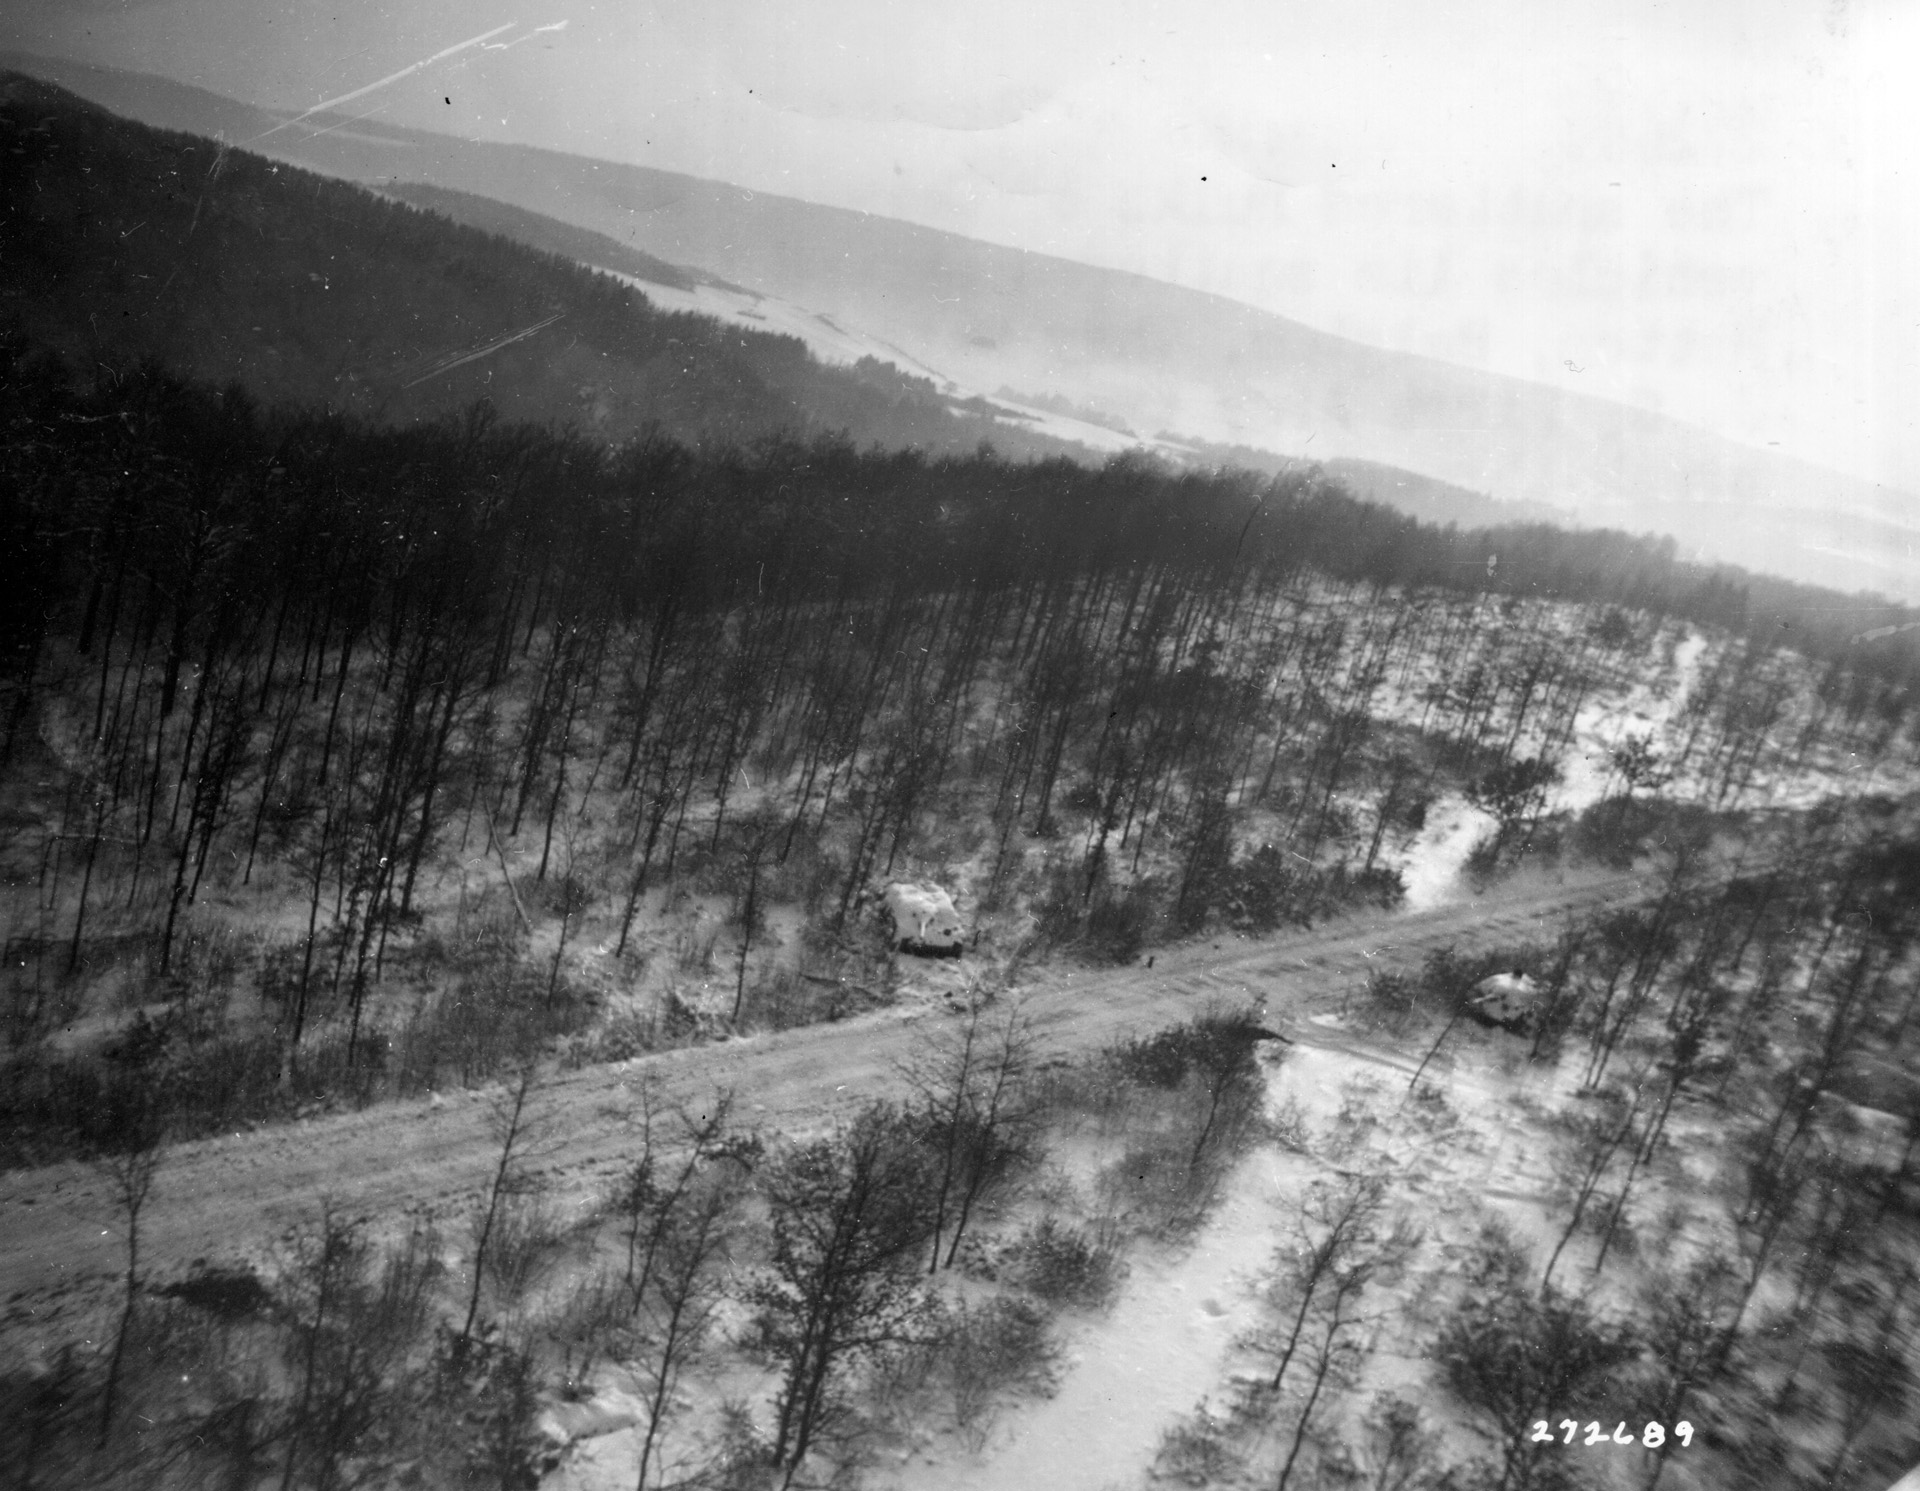 The abandoned hulks of two German armored vehicles, probably Sturmgeschutze assault guns, are pictured in this aerial image taken after the battle at Hotton.